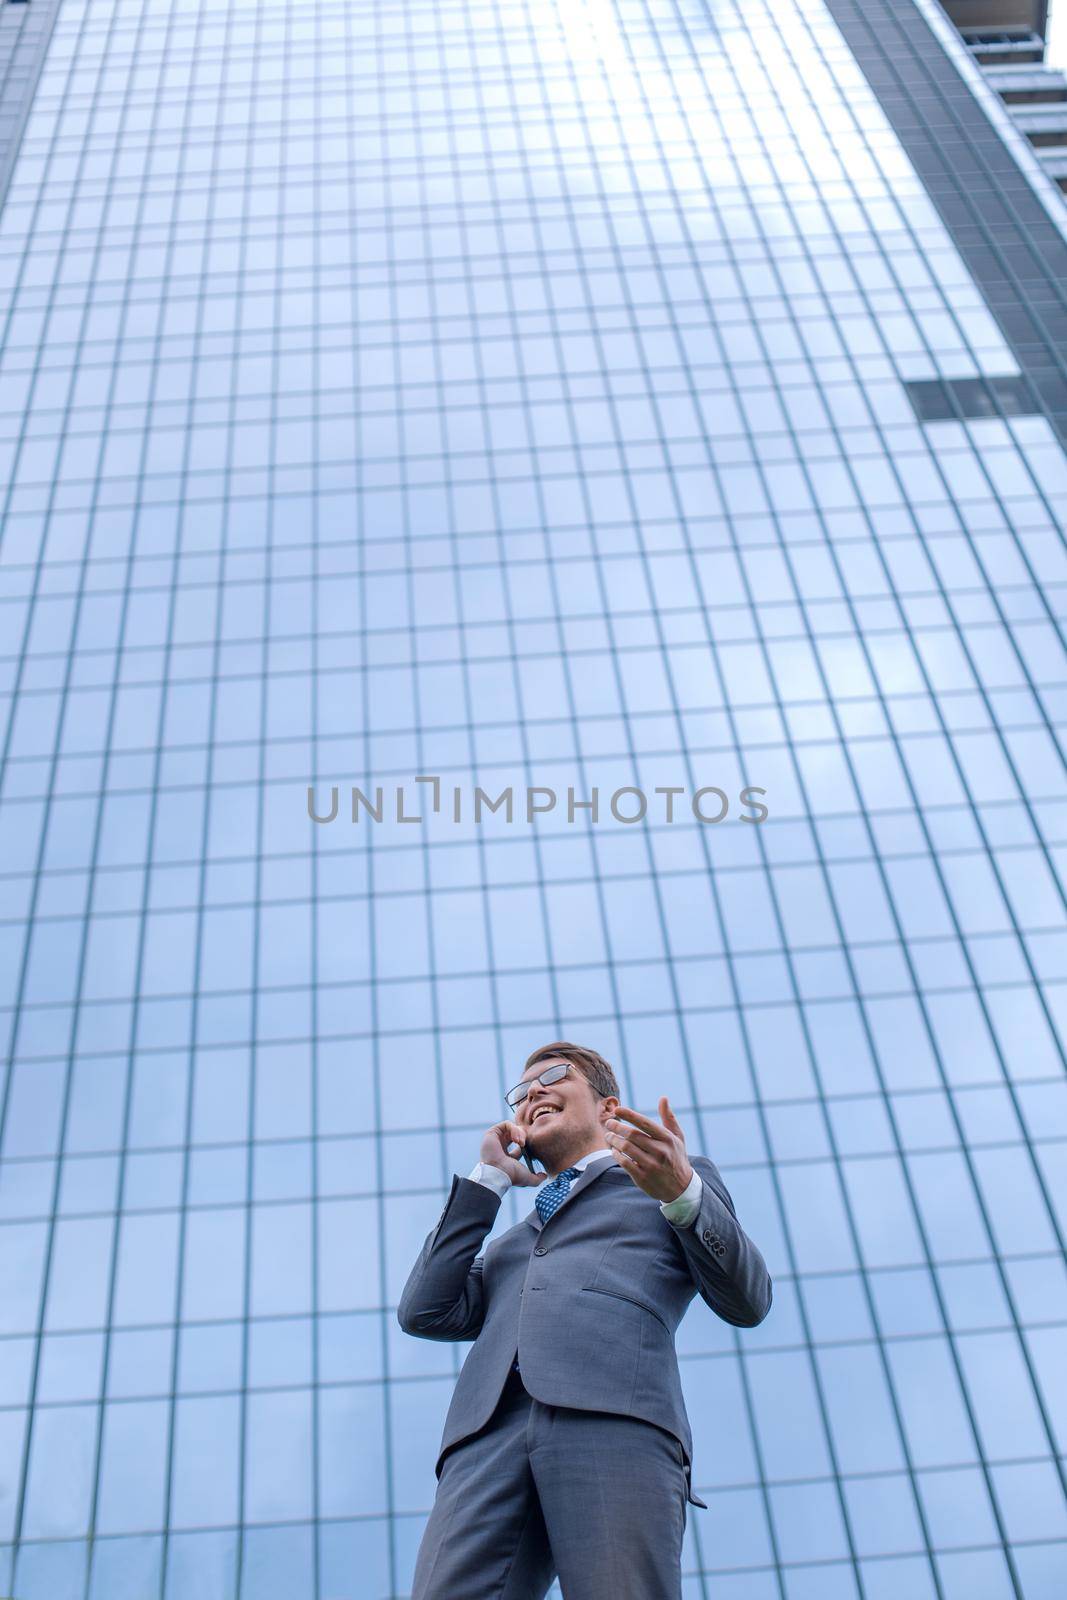 happy business man with smartphone standing in front of high rise office building. photo with copy space